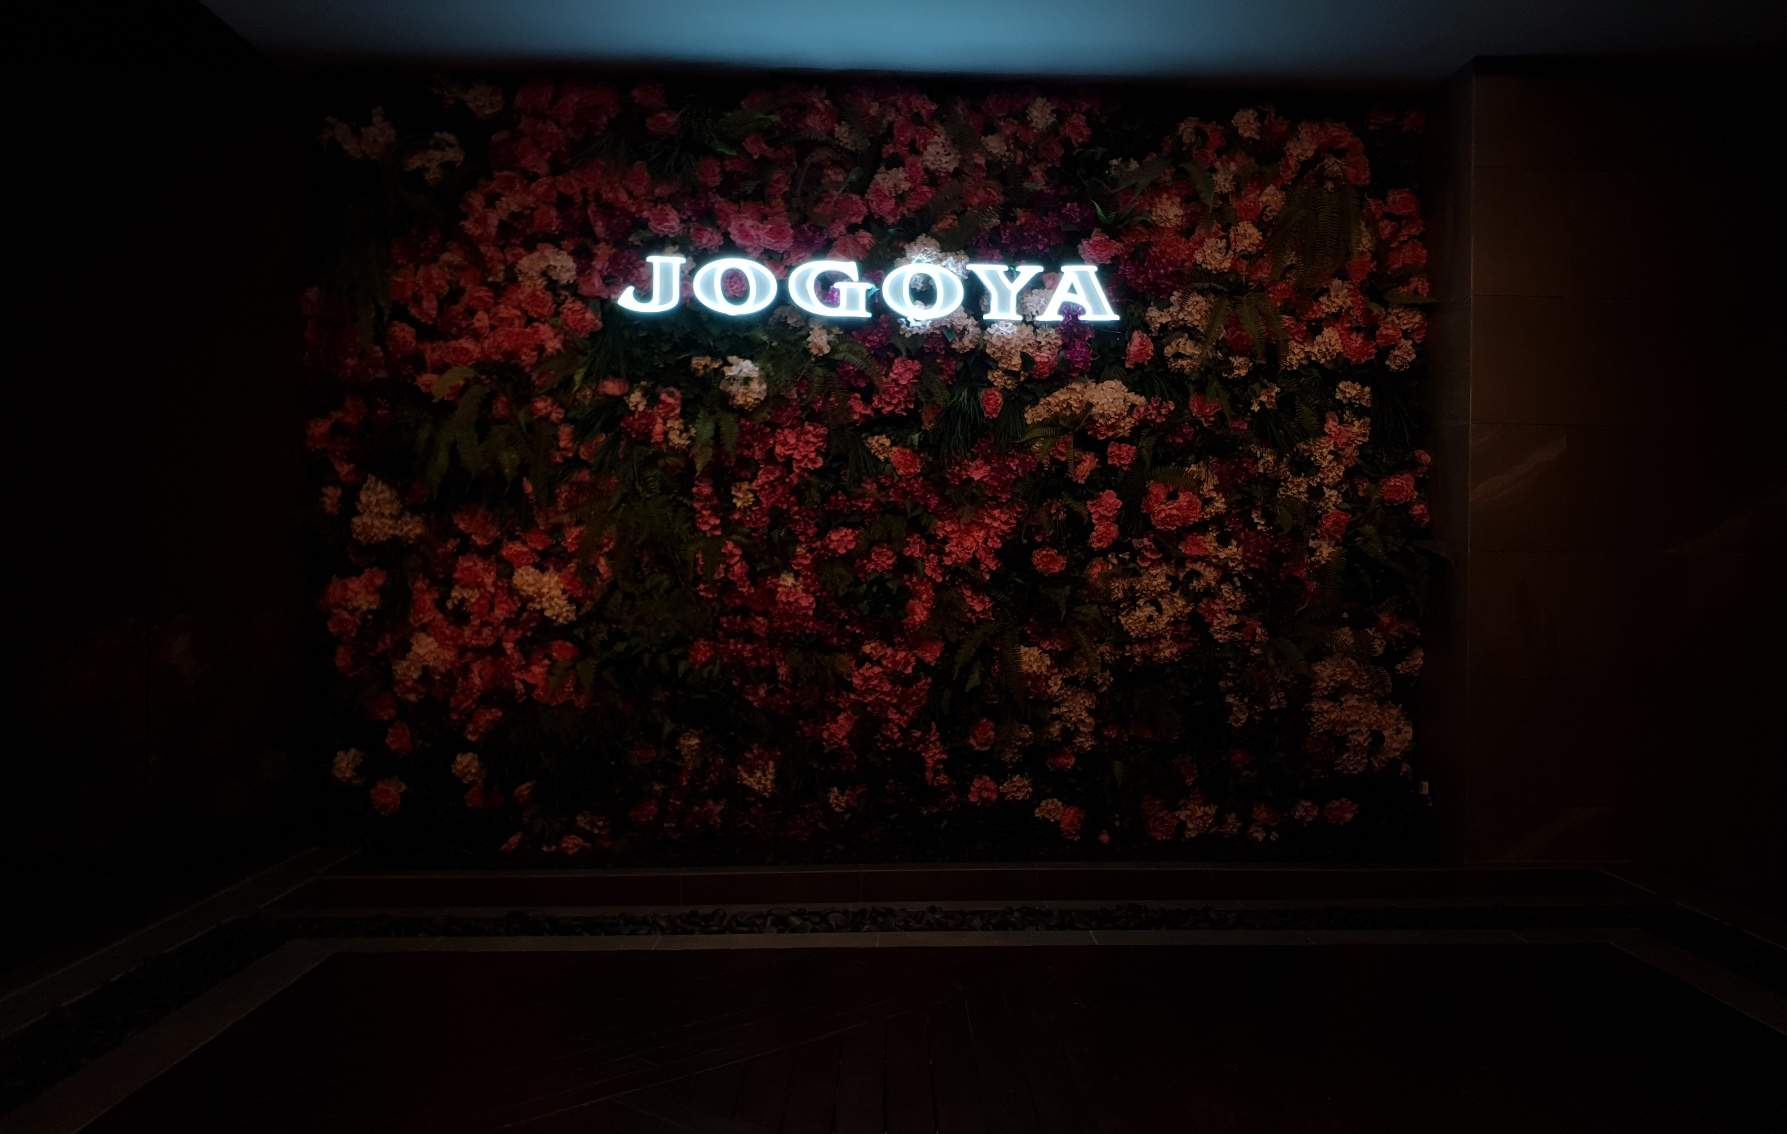 Is jogoya the top japanese buffet place? This food blogger doesn't think so | weirdkaya